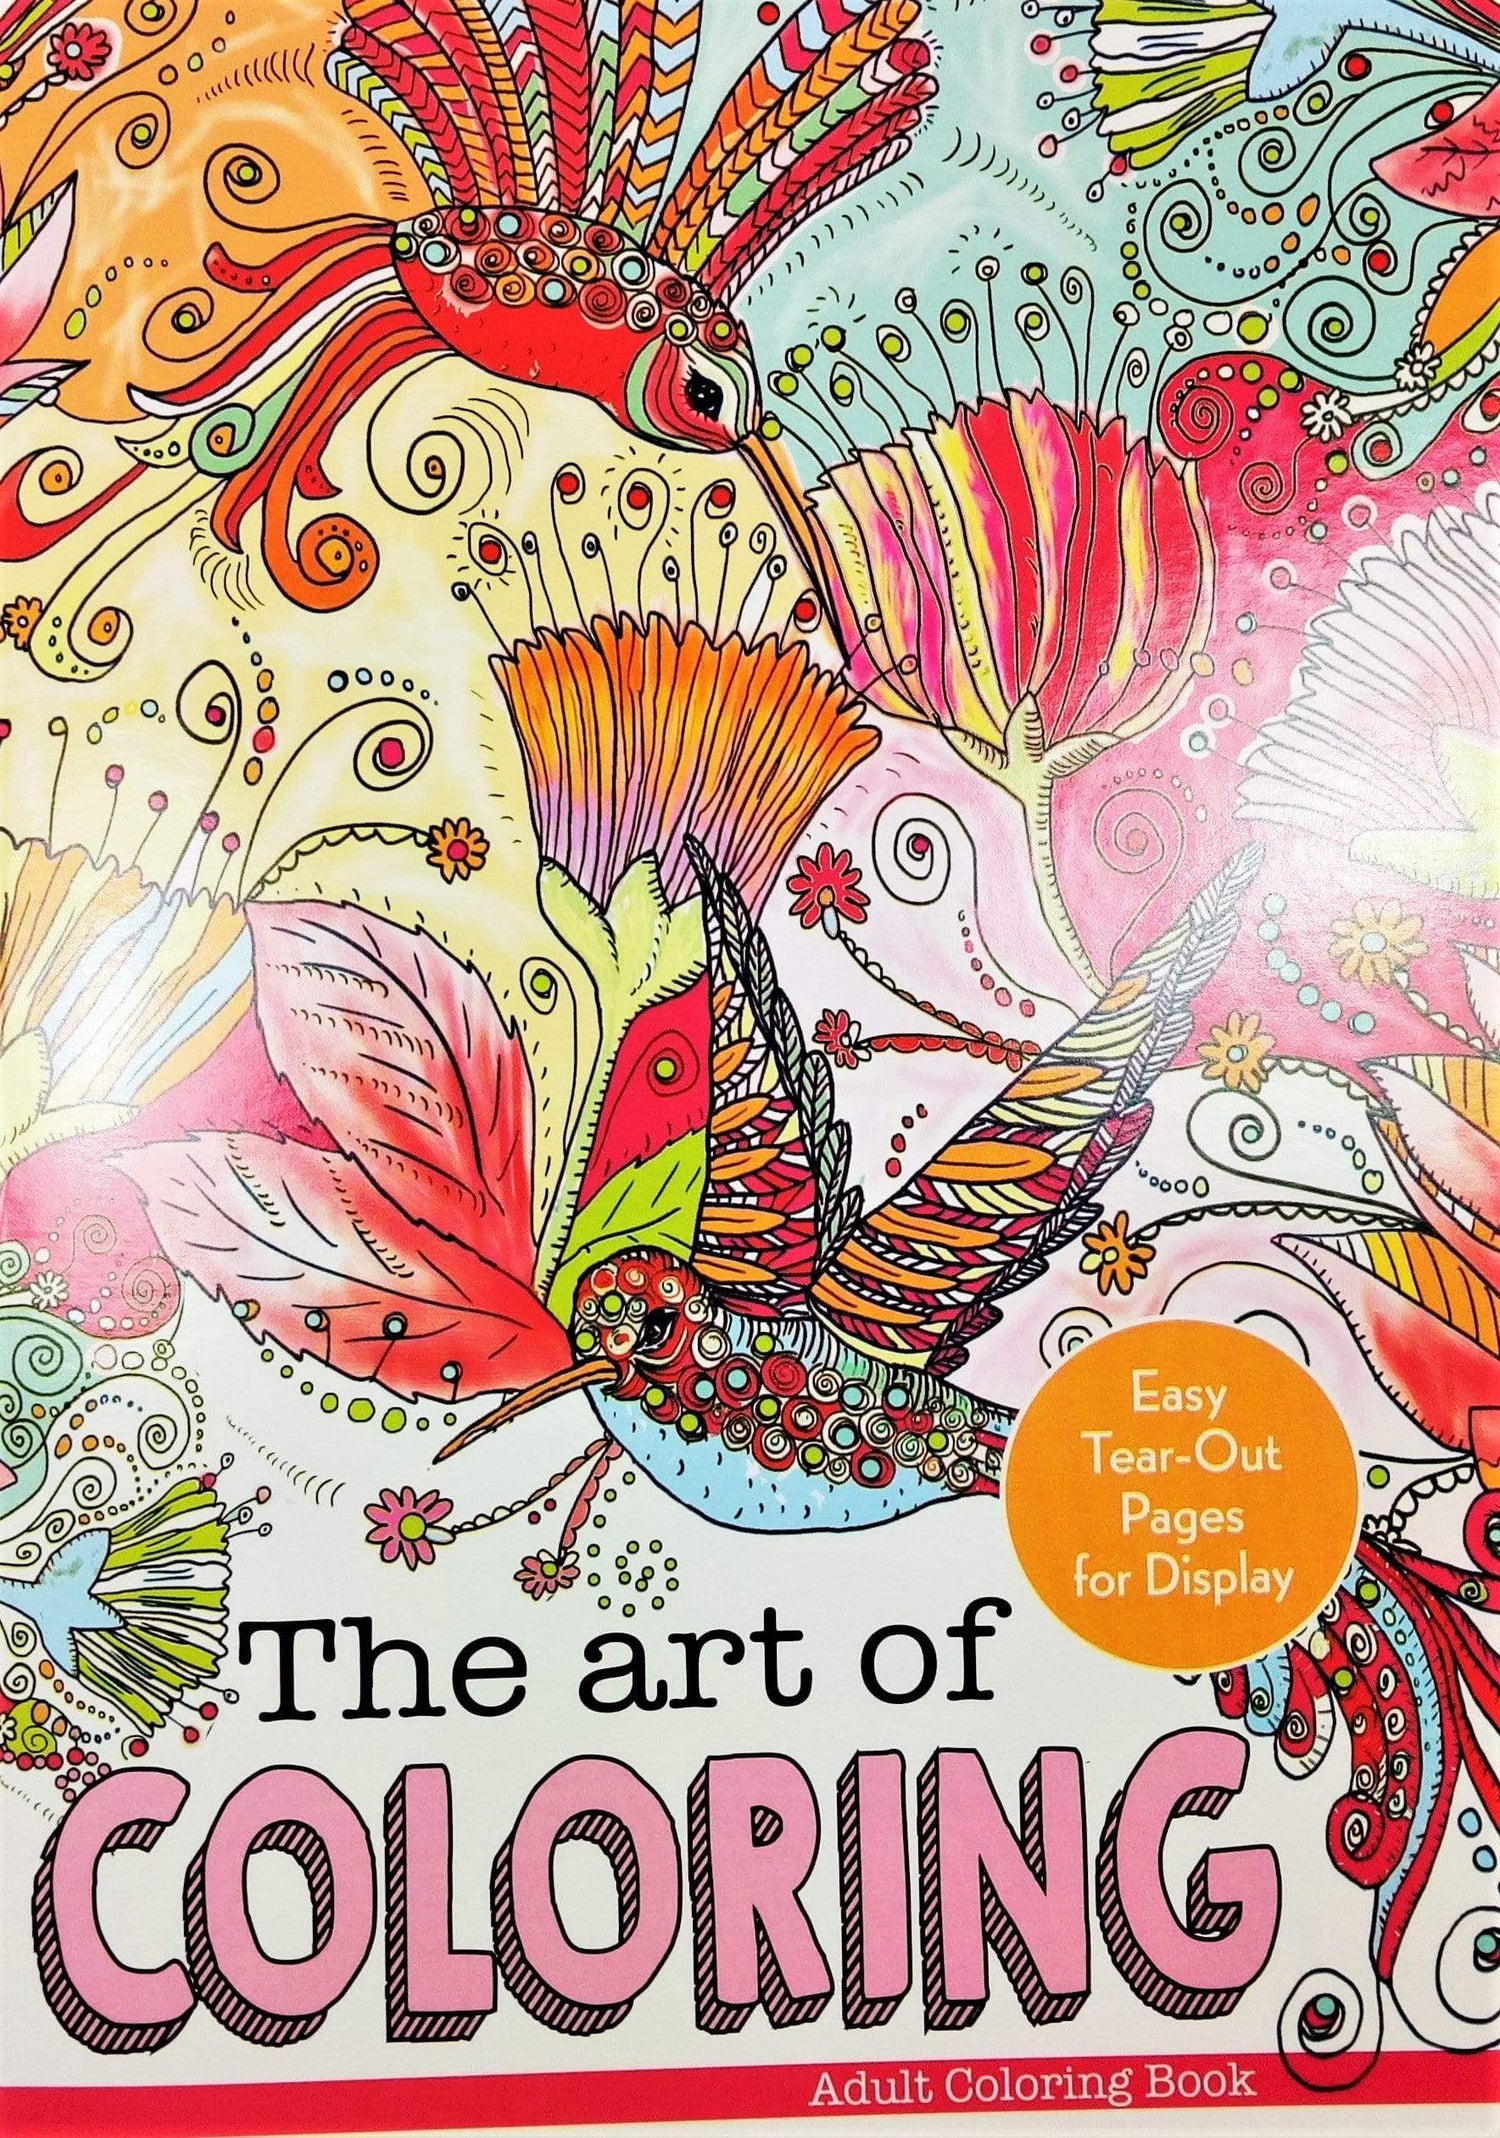 The Art Of Coloring